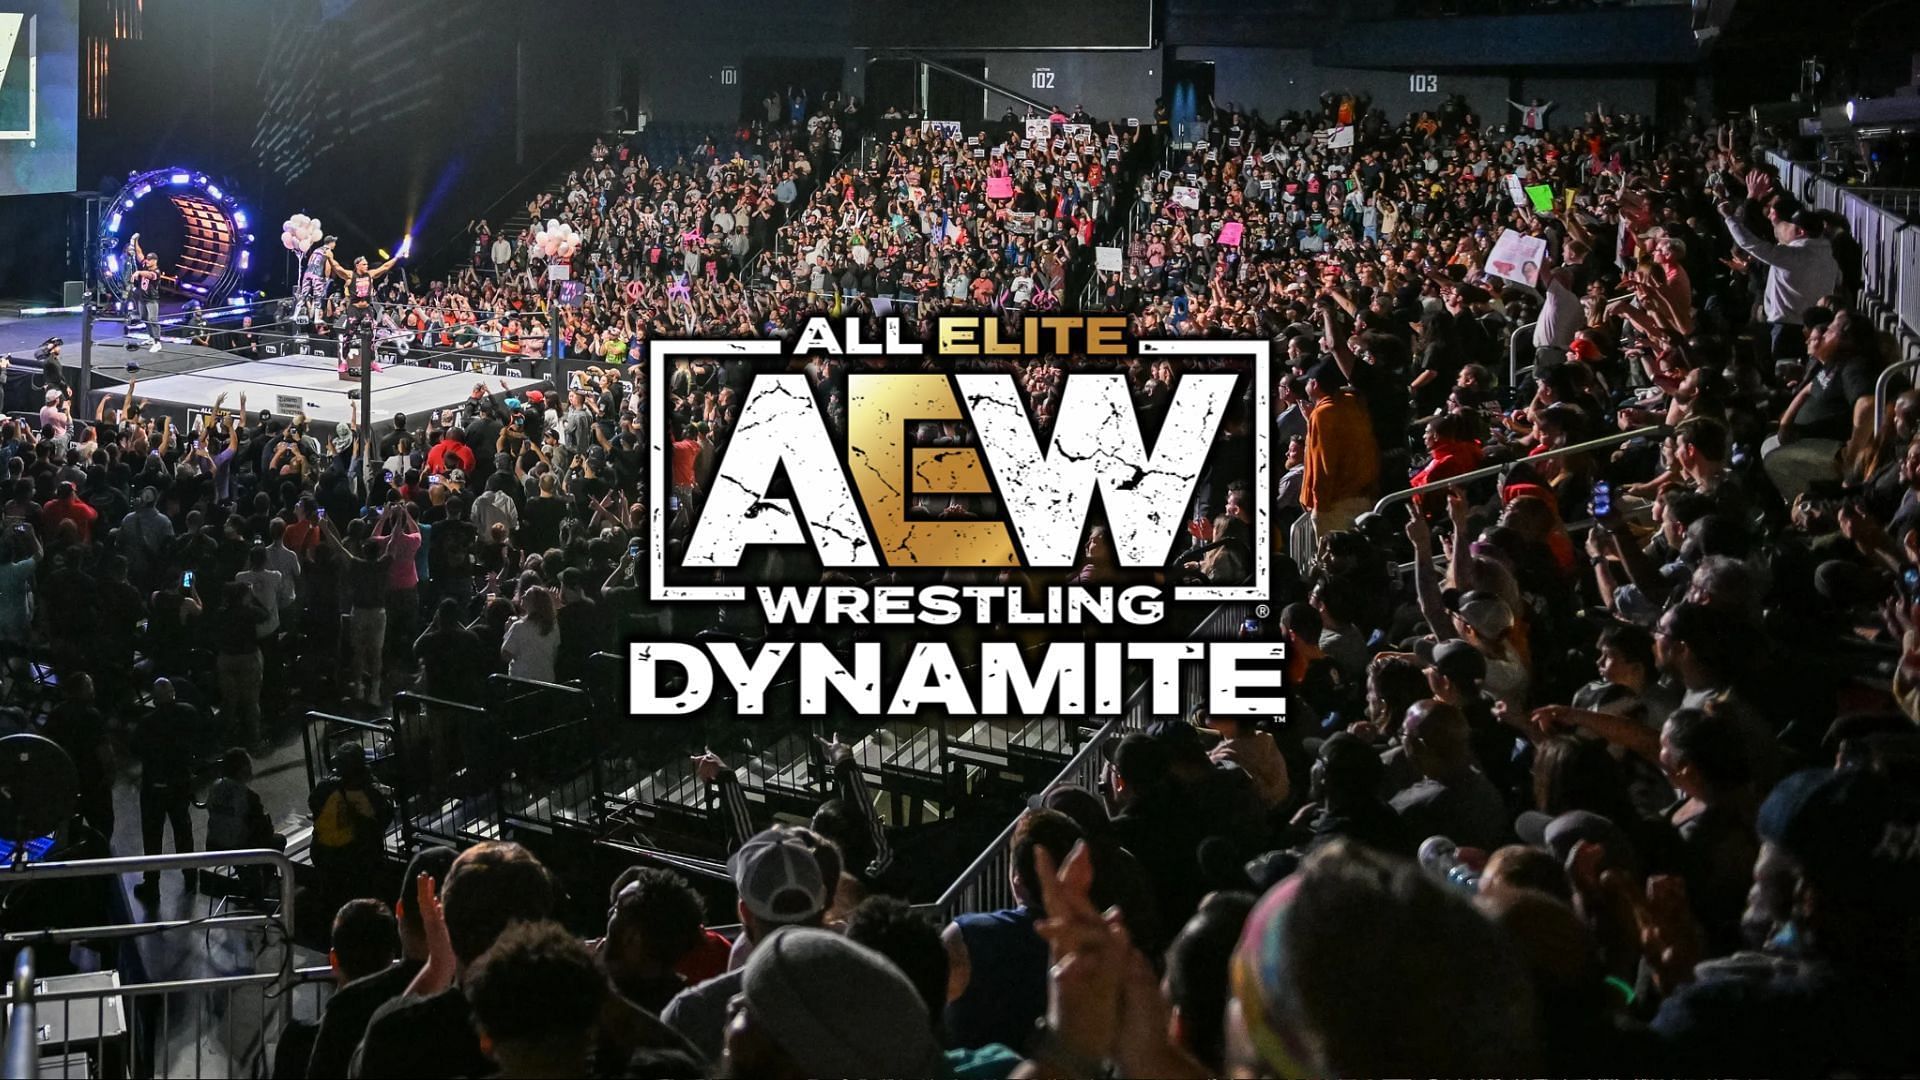 AEW Dynamite Winter is Coming 2023 will be held in Arlington,Texas